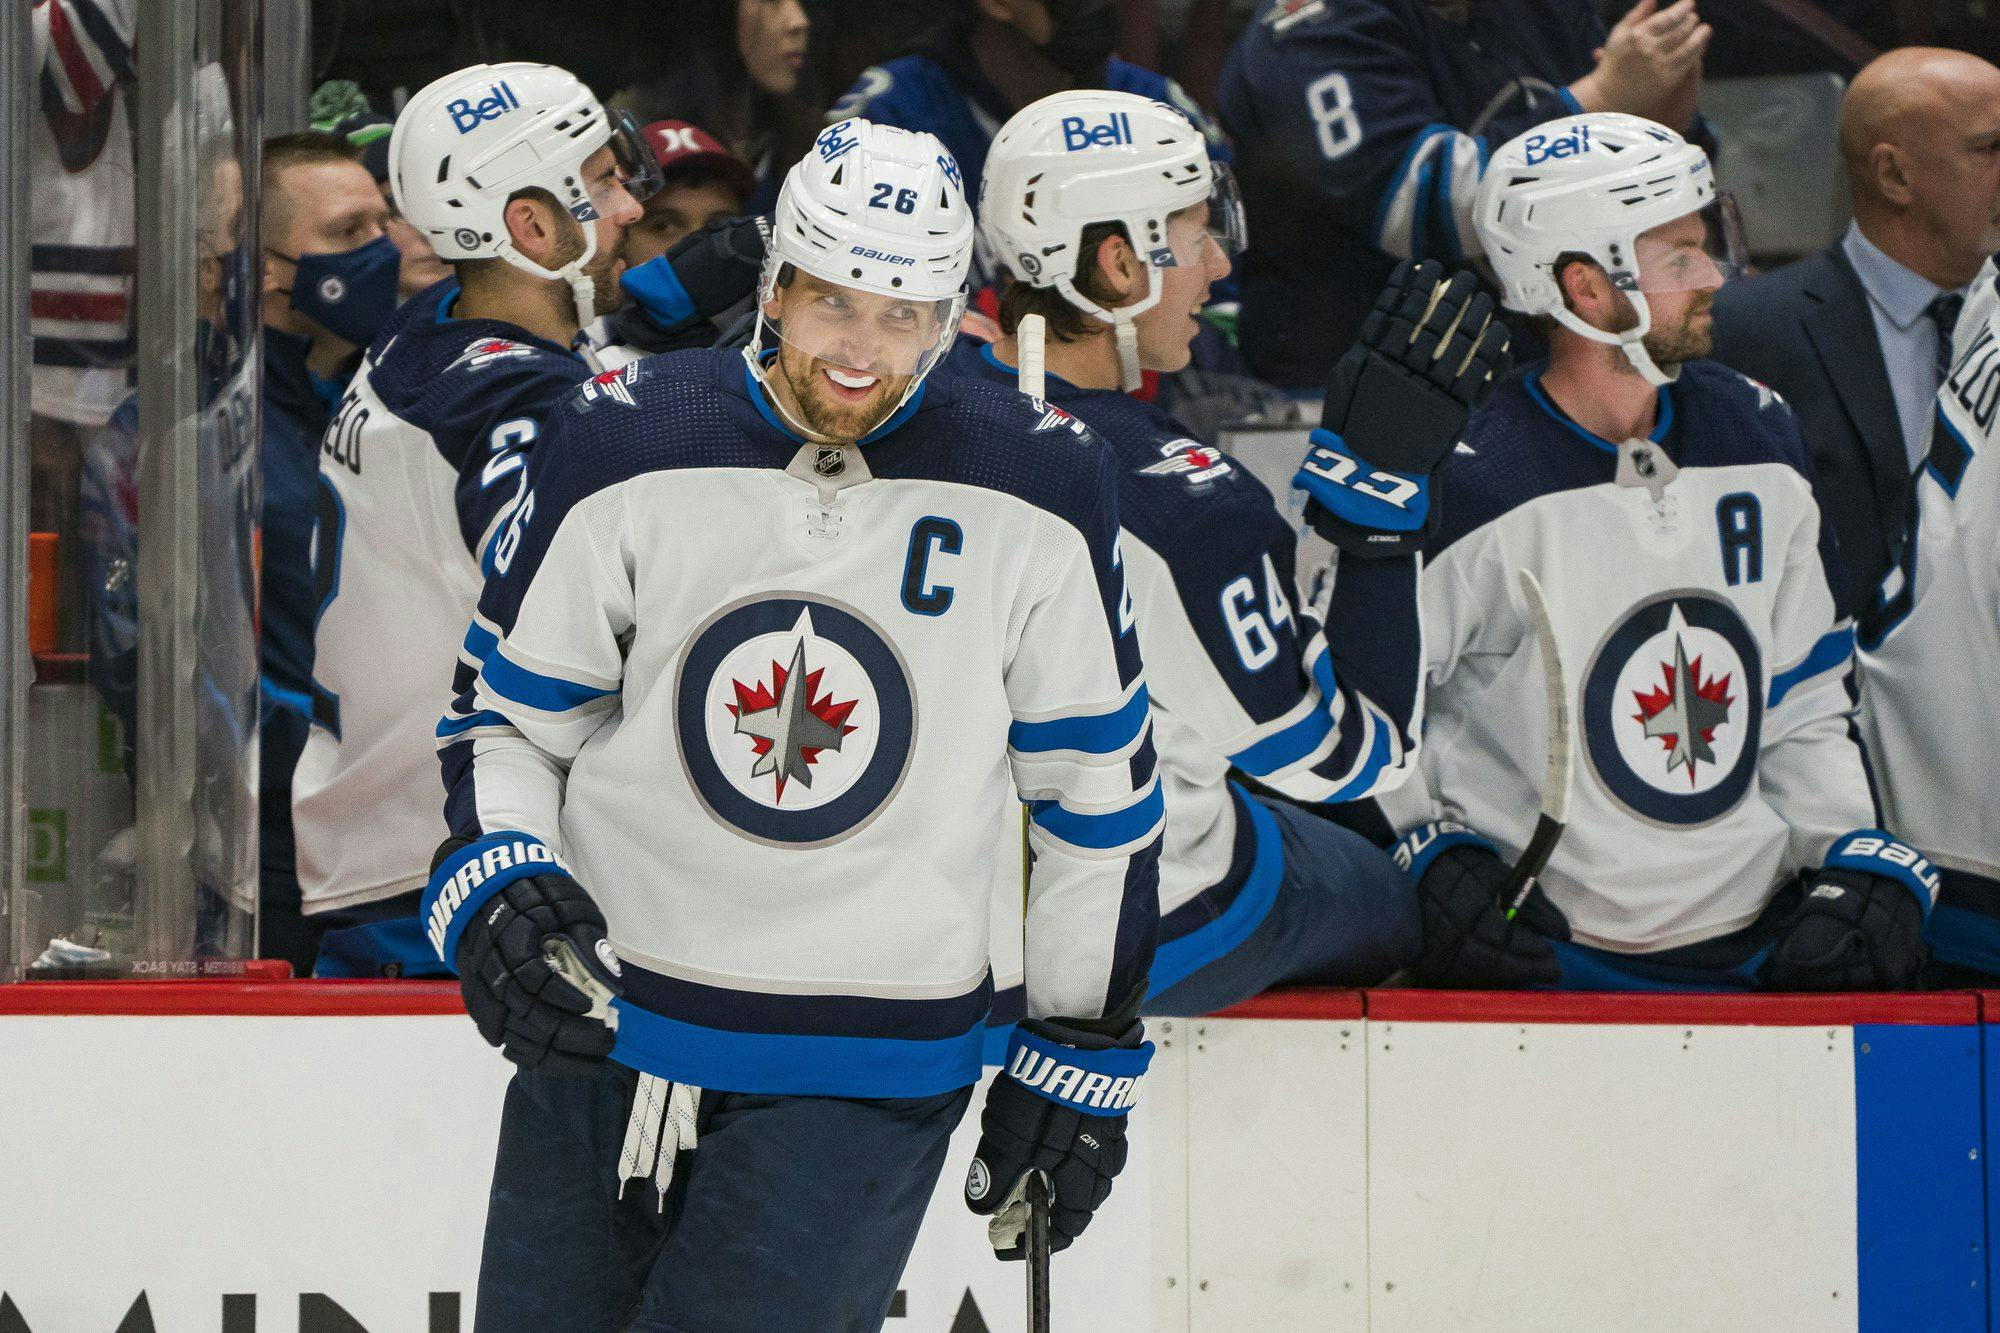 Winnipeg Jets - We know Blake Wheeler wears the number 26 on his